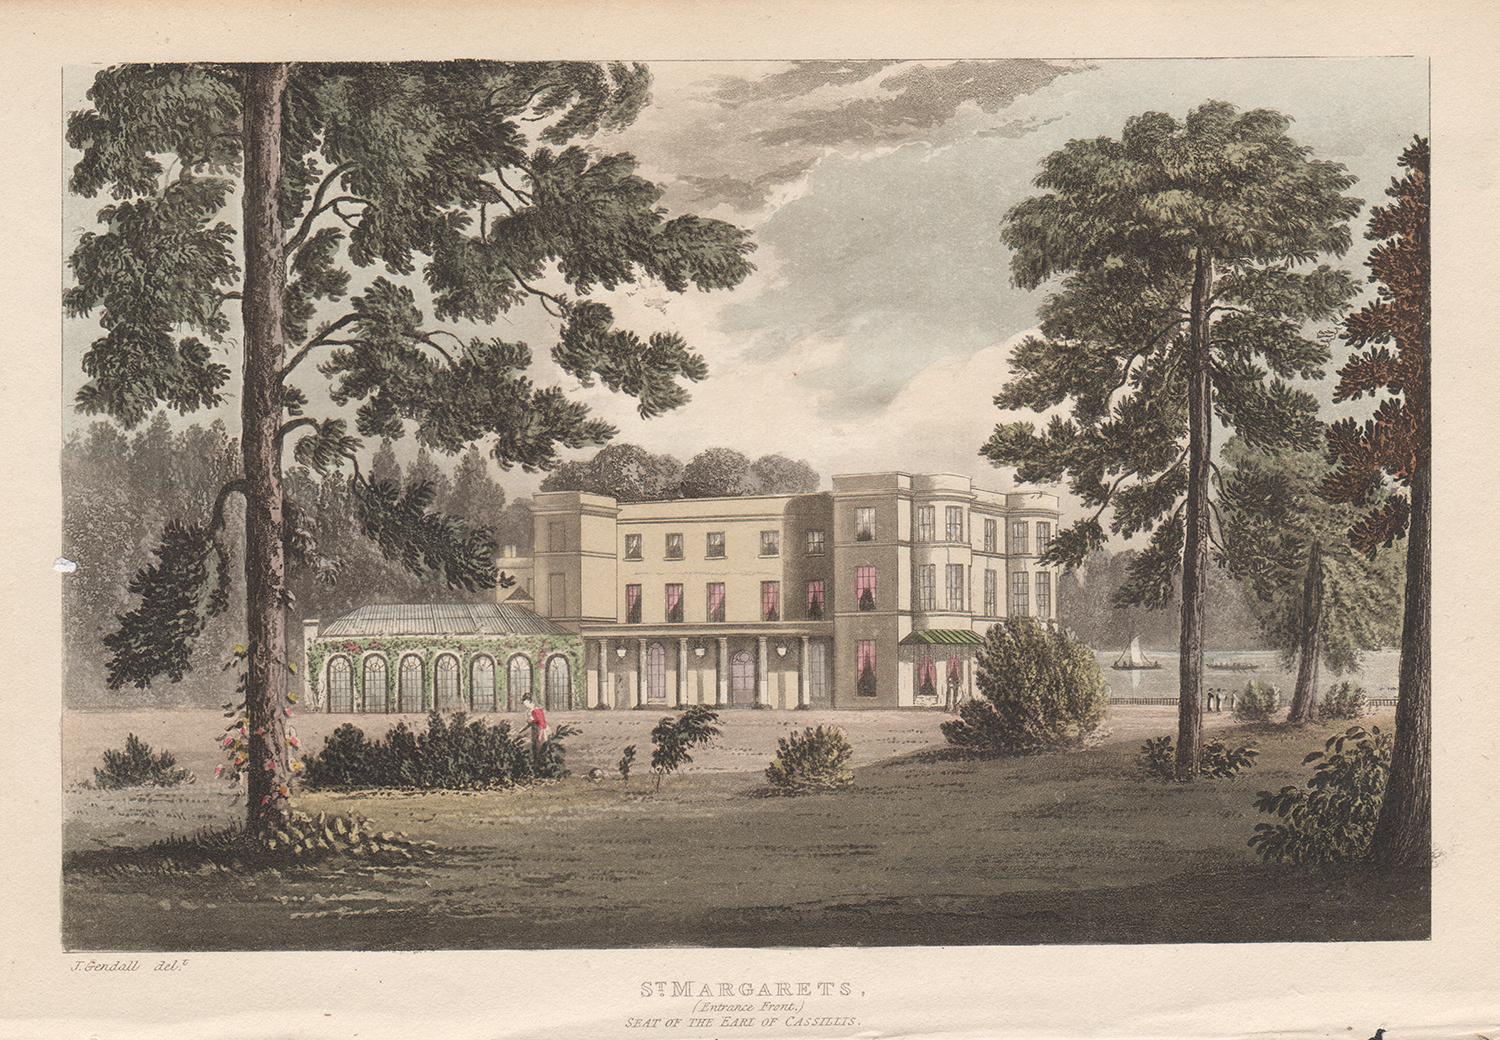 St Margarets, Isleworth, English Regency country house colour aquatint, 1818